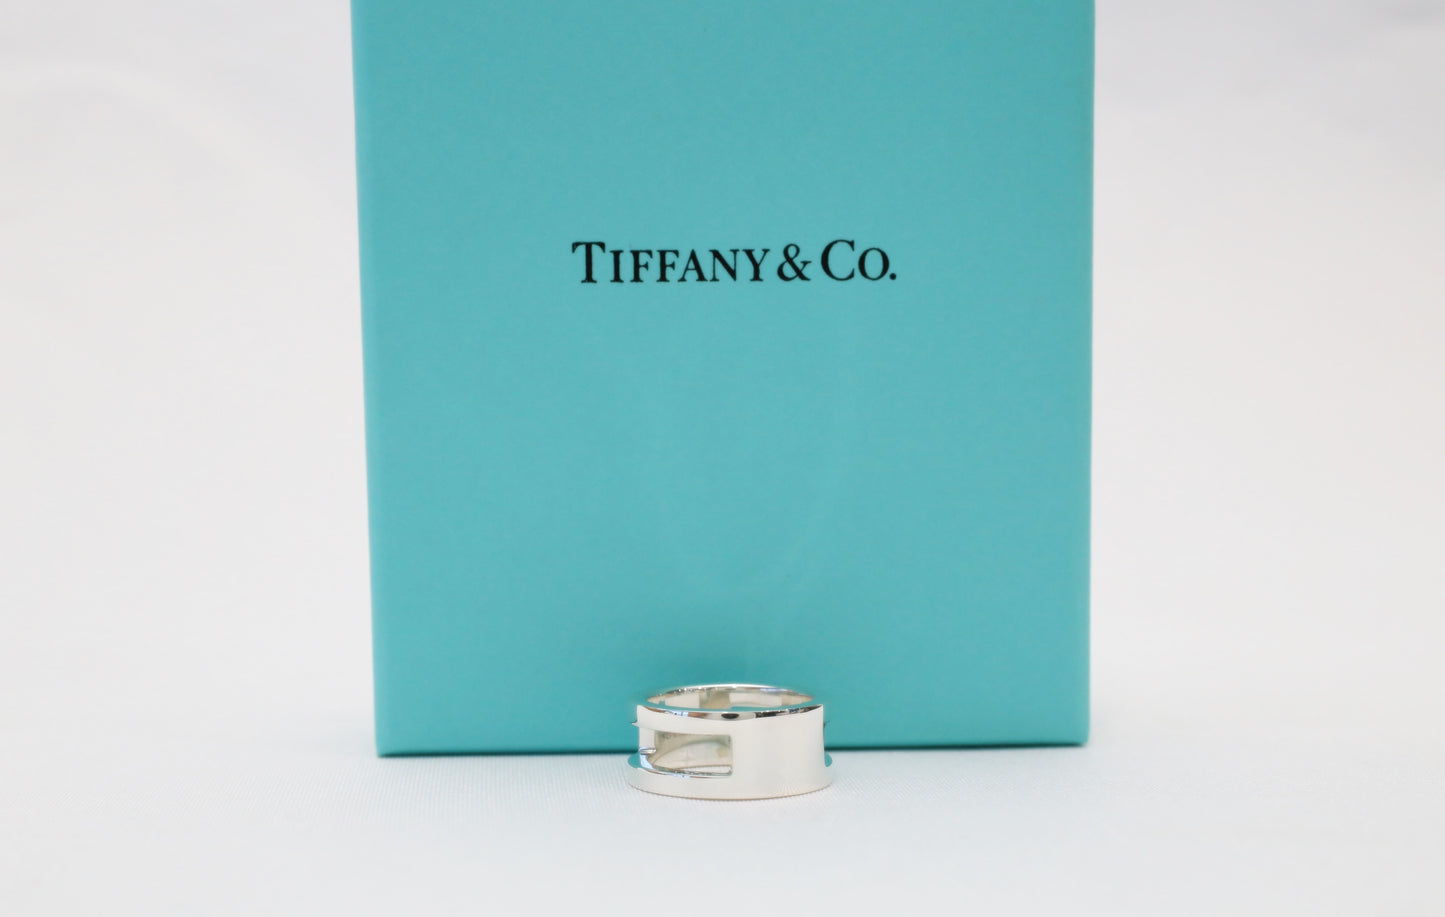 NEW Tiffany & Co. Sterling Silver Out of Retirement ID Ring, Size 6 - 7.4g